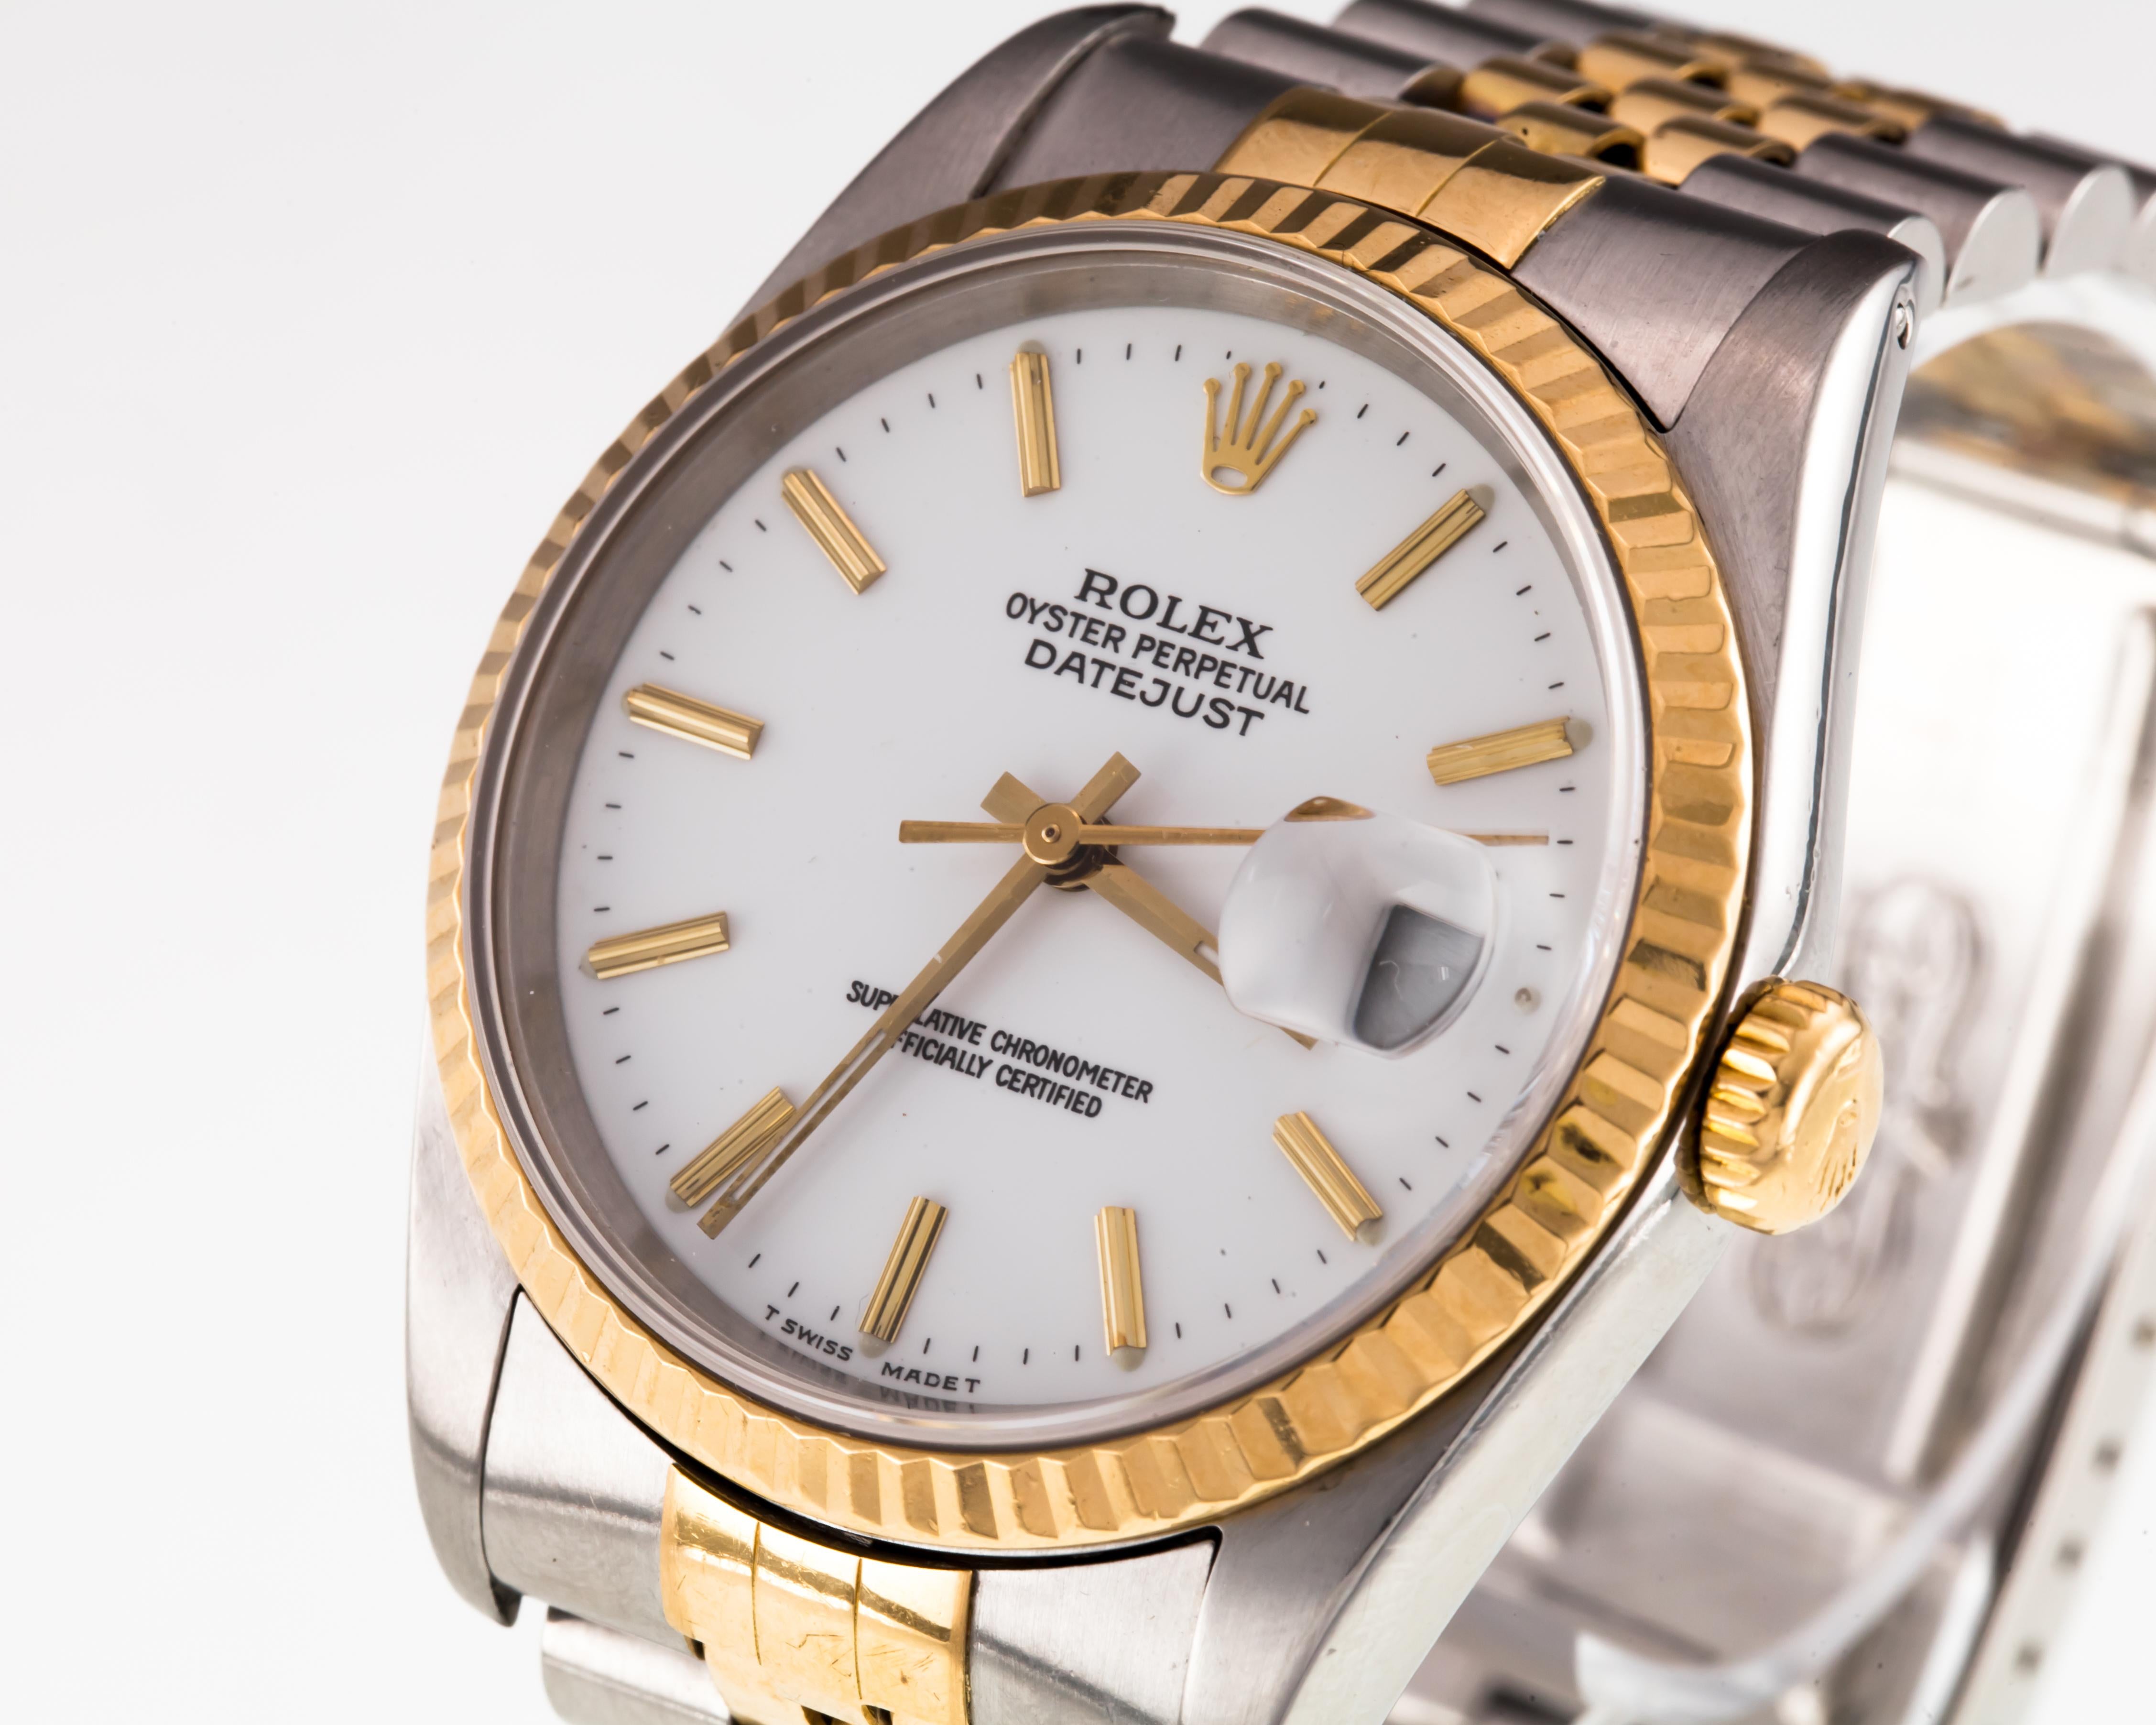 Modern Rolex Men's Two Tone Stainless & Yellow Gold OPDJ Automatic Watch 16233